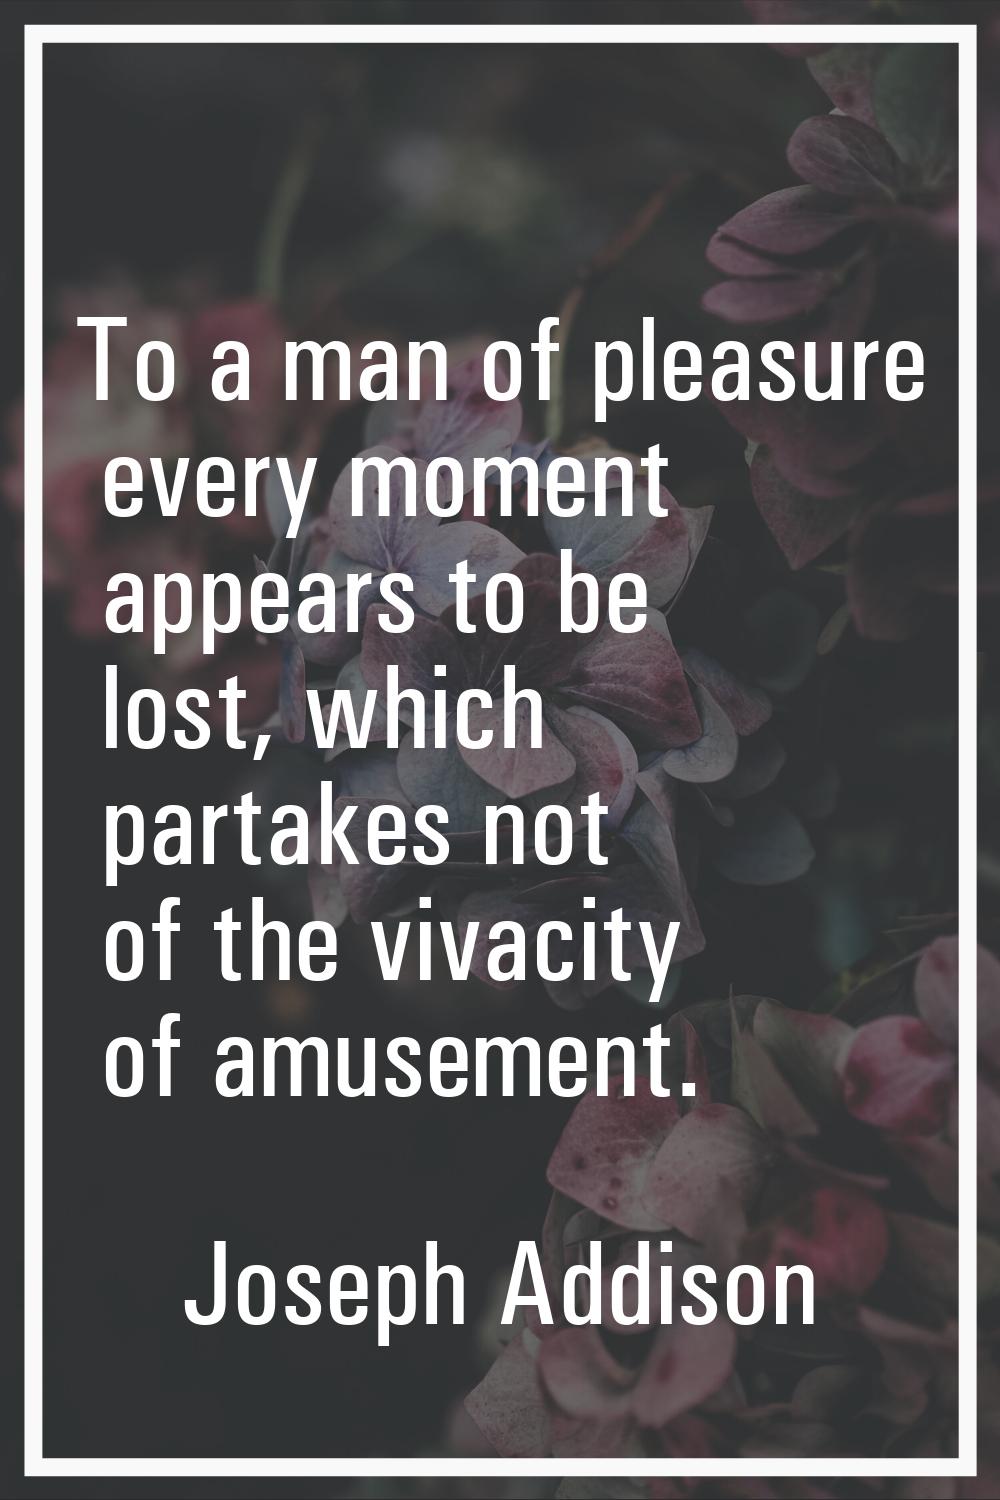 To a man of pleasure every moment appears to be lost, which partakes not of the vivacity of amuseme